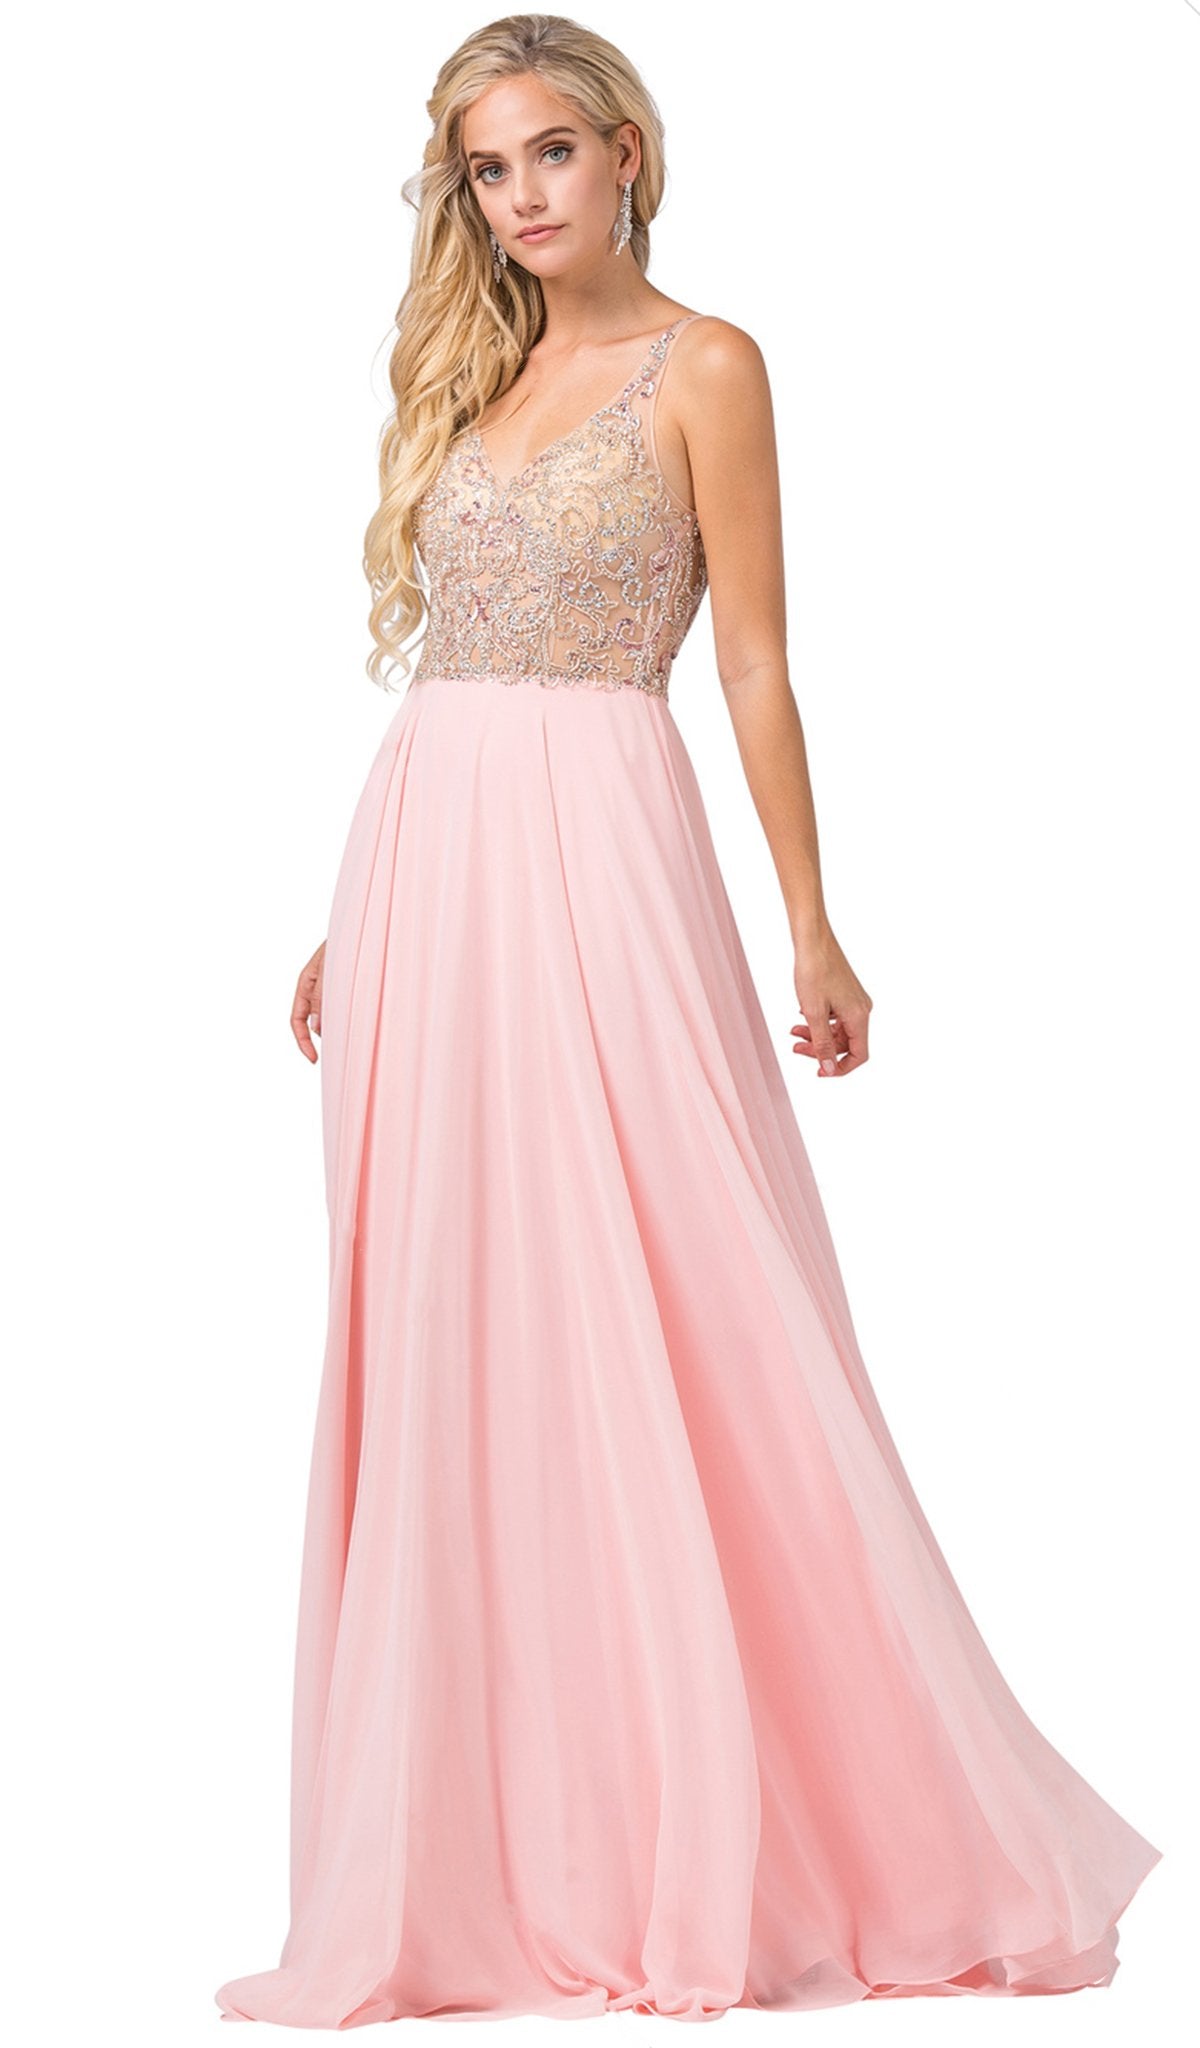 Dancing Queen - 2513 Beaded Embellished Illusion Bodice Chiffon Gown In Pink